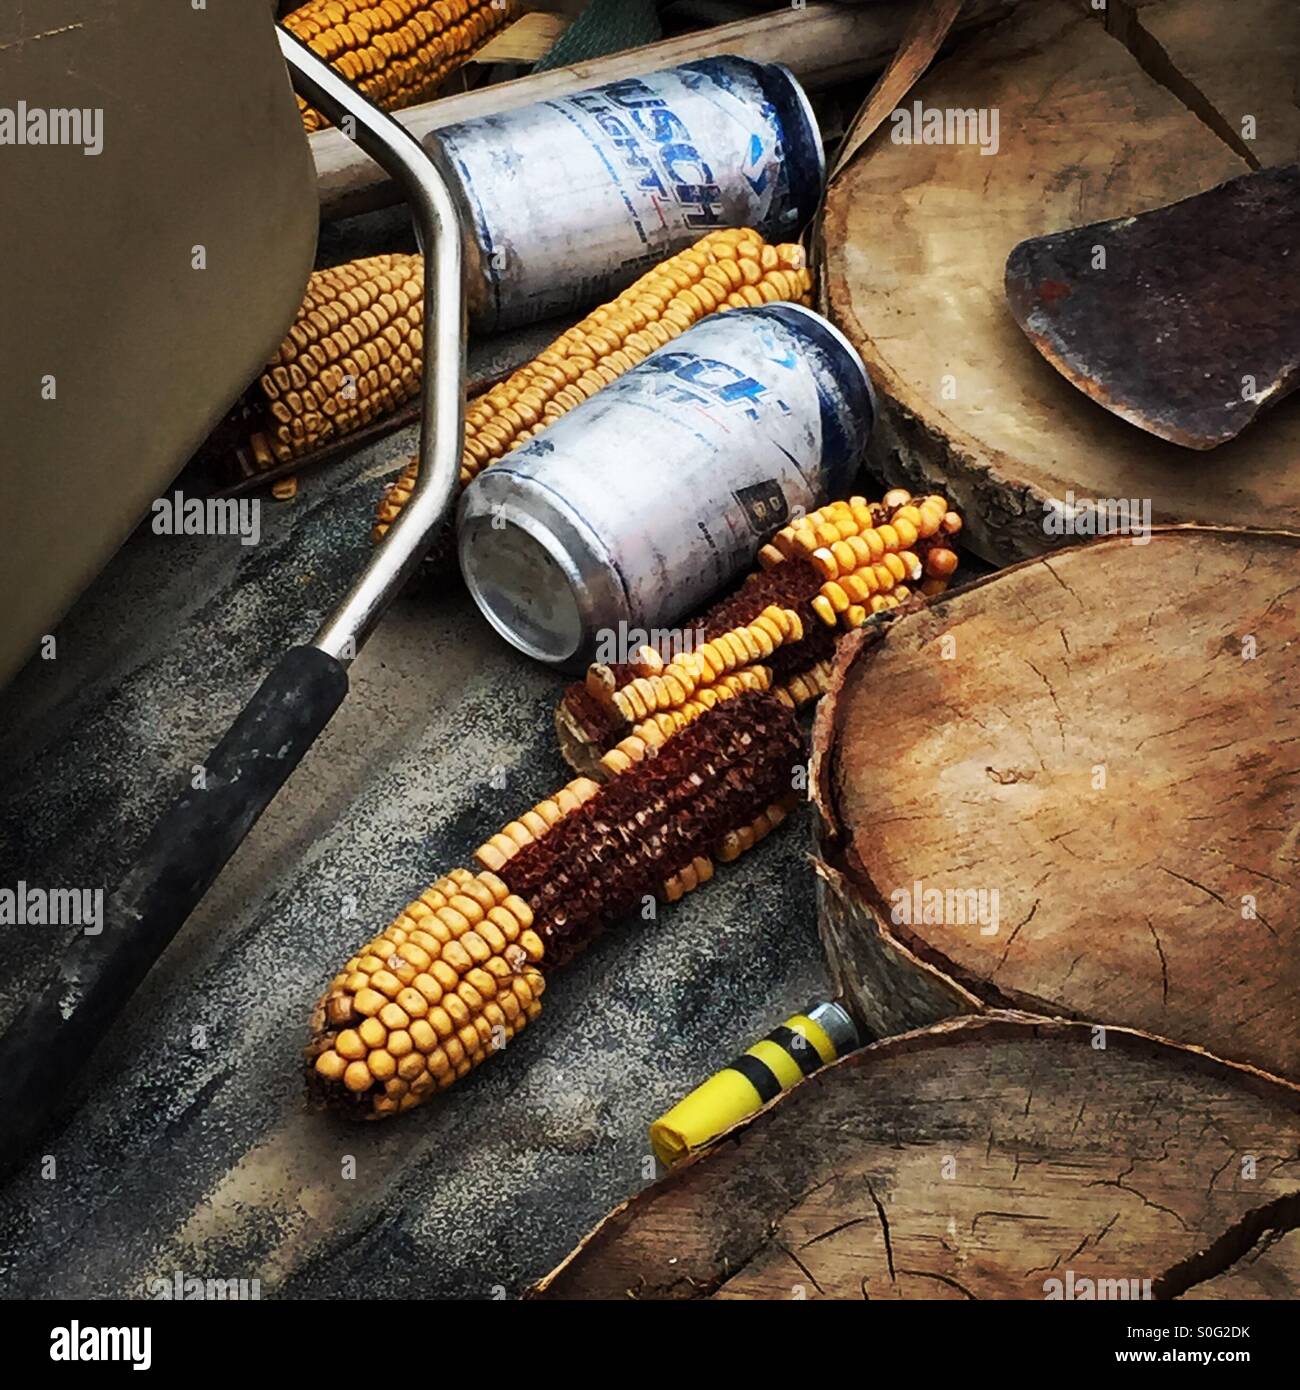 A tableau of items including empty beer cans, corn cobs, wood, an axe and a shotgun shell. Stock Photo